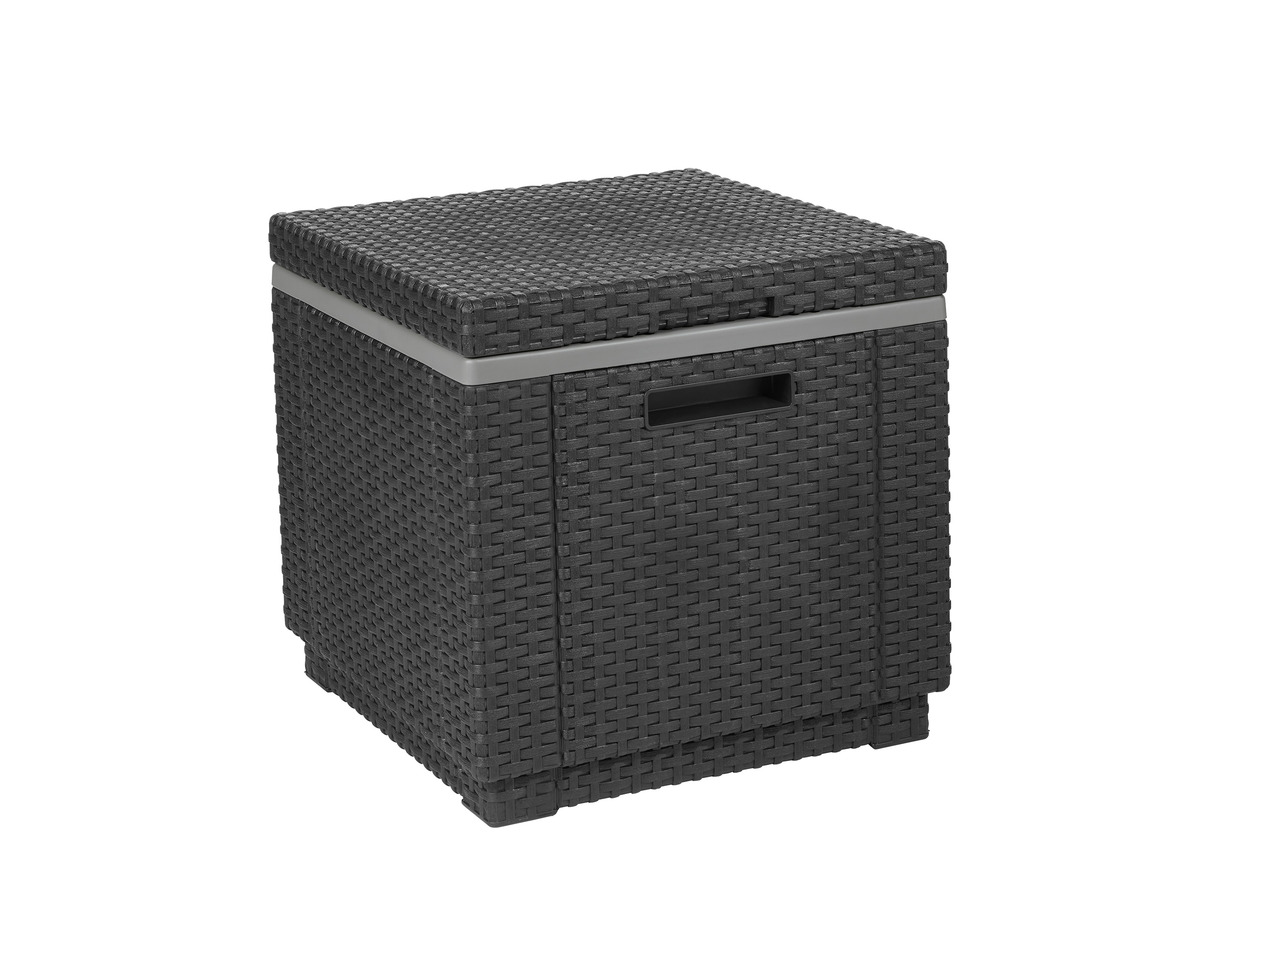 Allibert Rattan Seat with Integrated Cool Box1